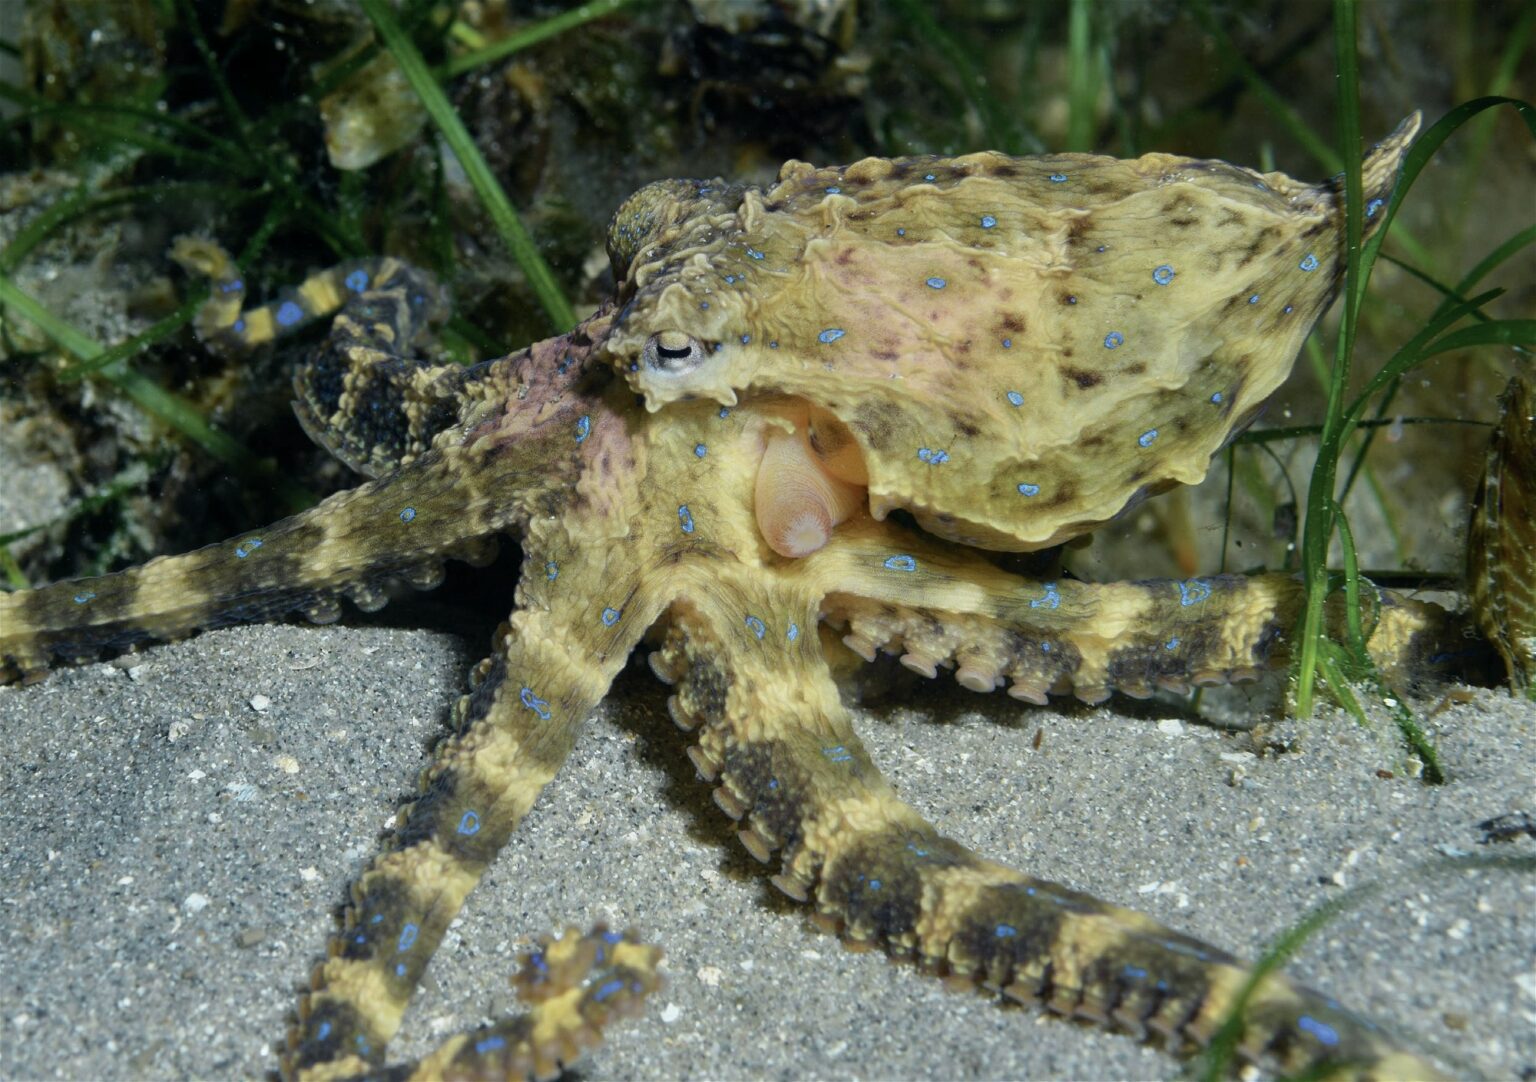 Blue-Ringed Octopus Fact File (teacher made) - Twinkl